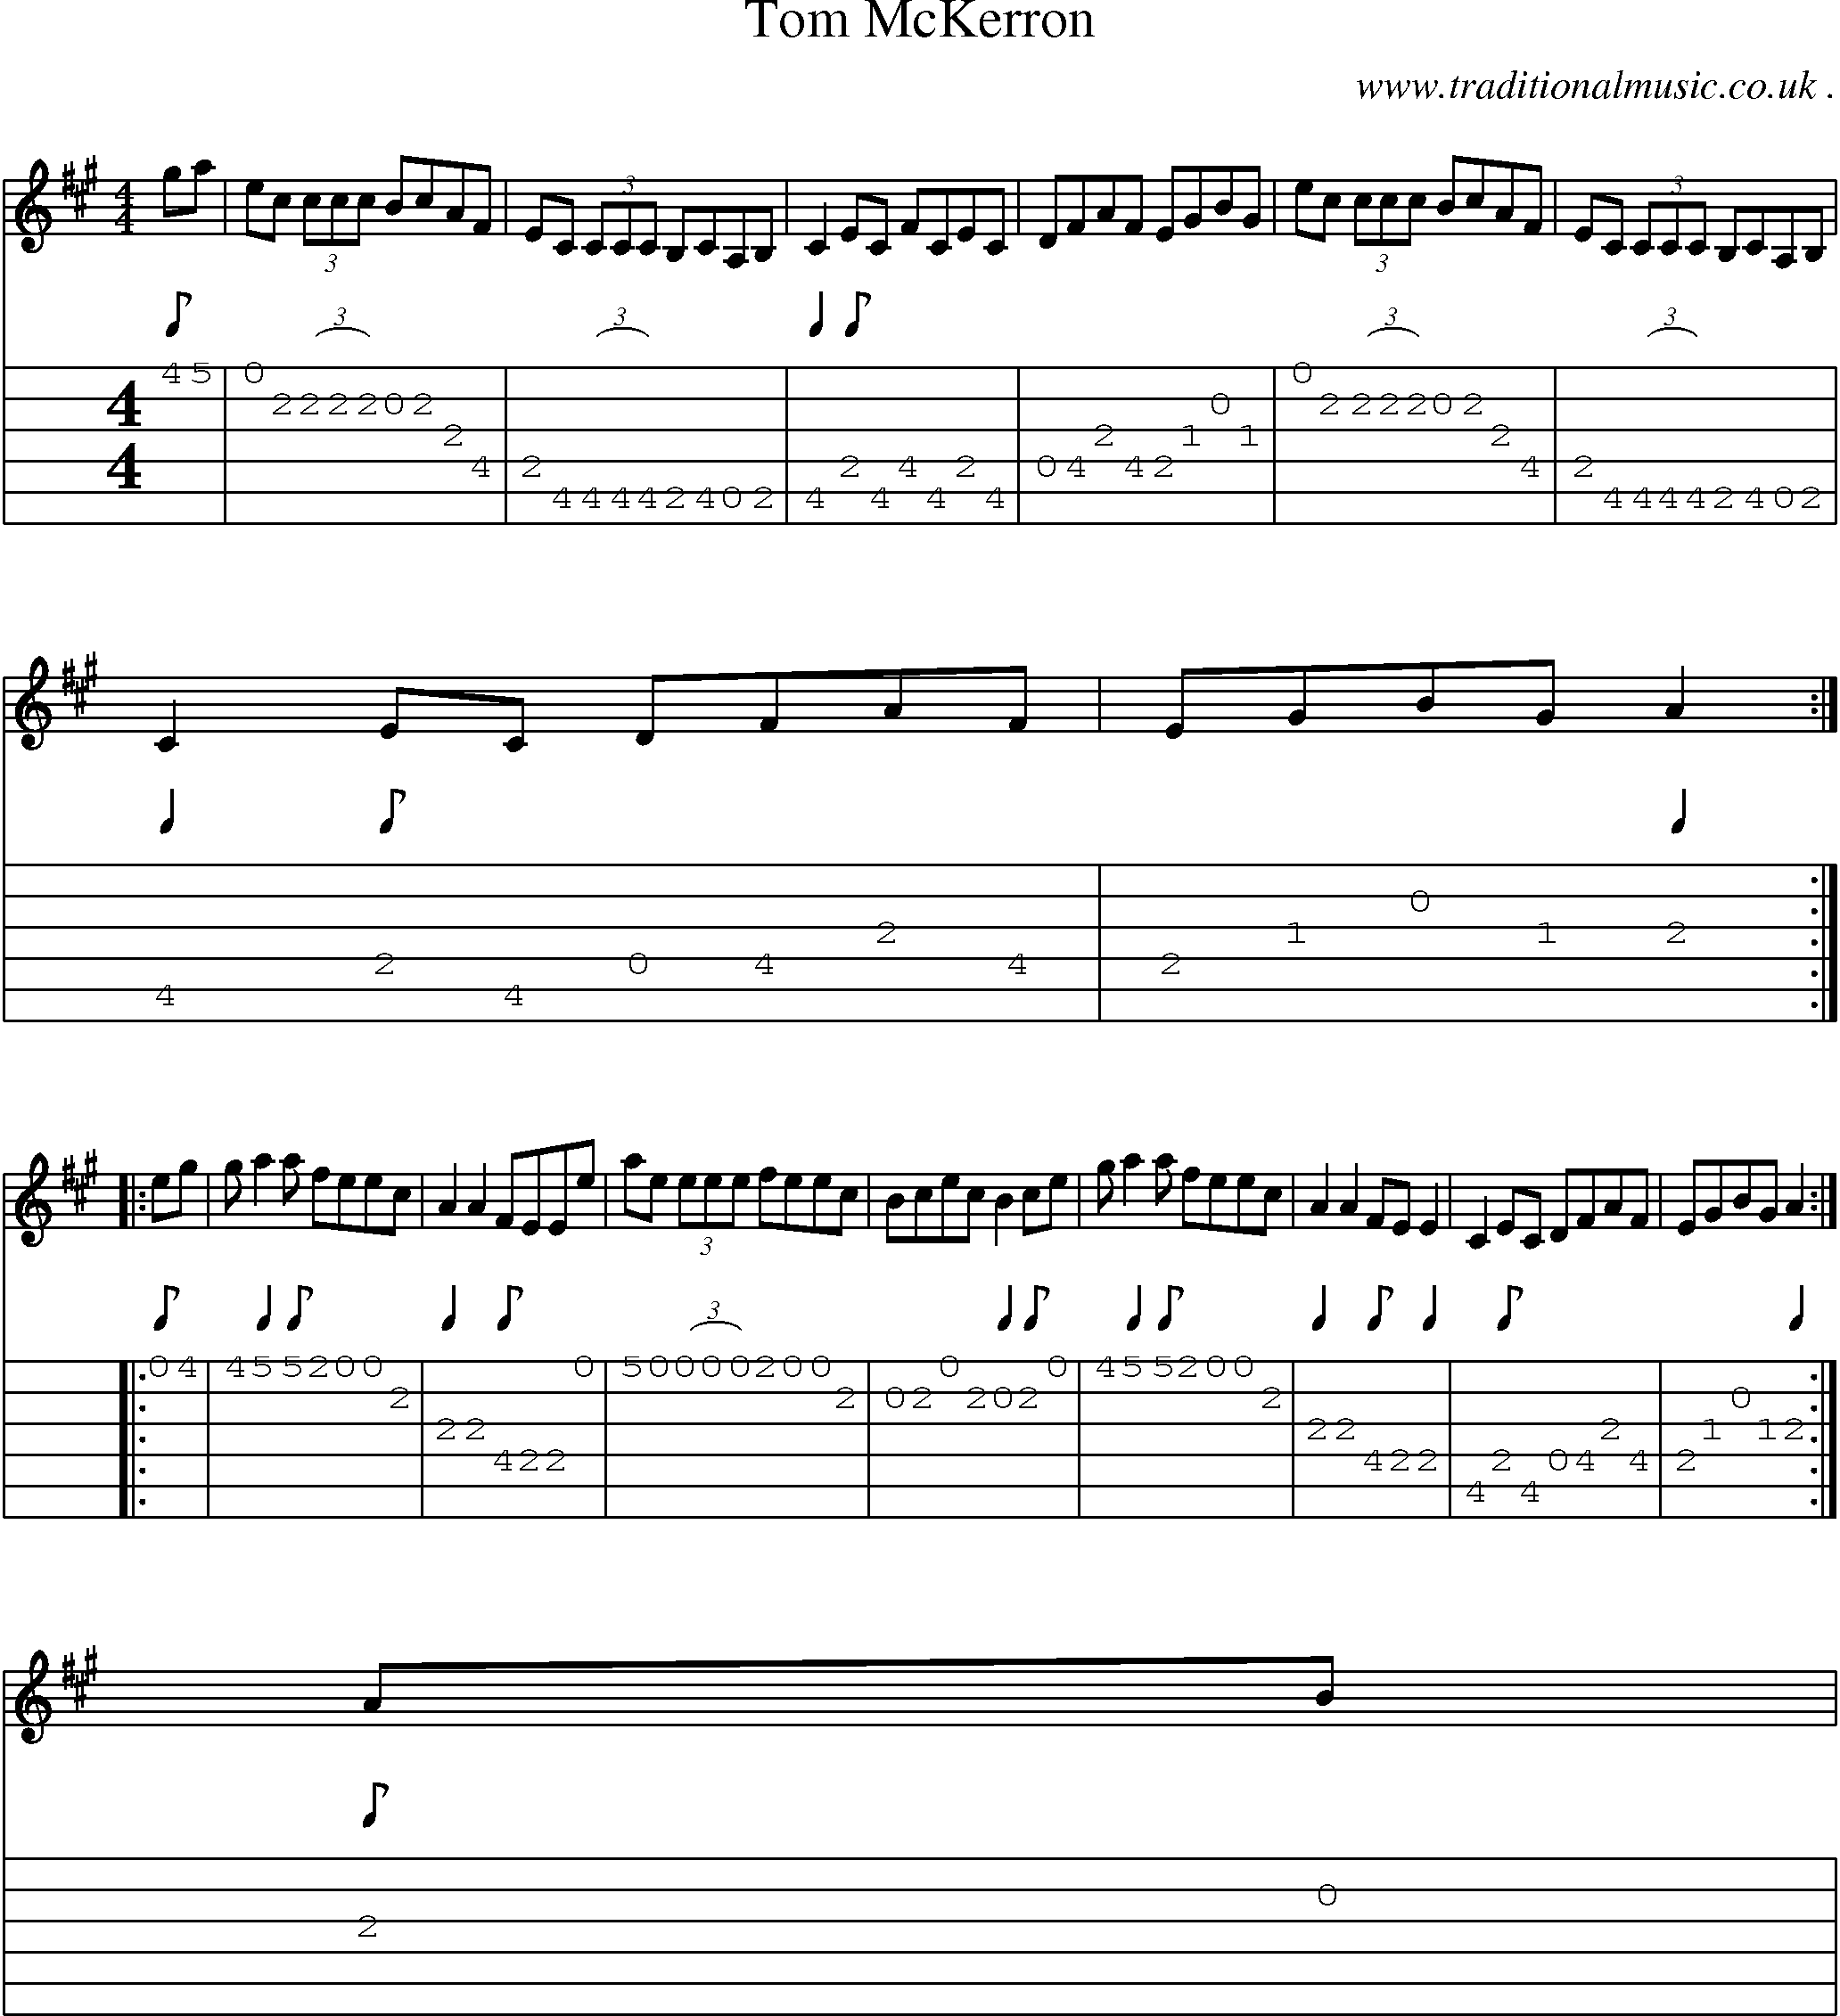 Sheet-music  score, Chords and Guitar Tabs for Tom Mckerron